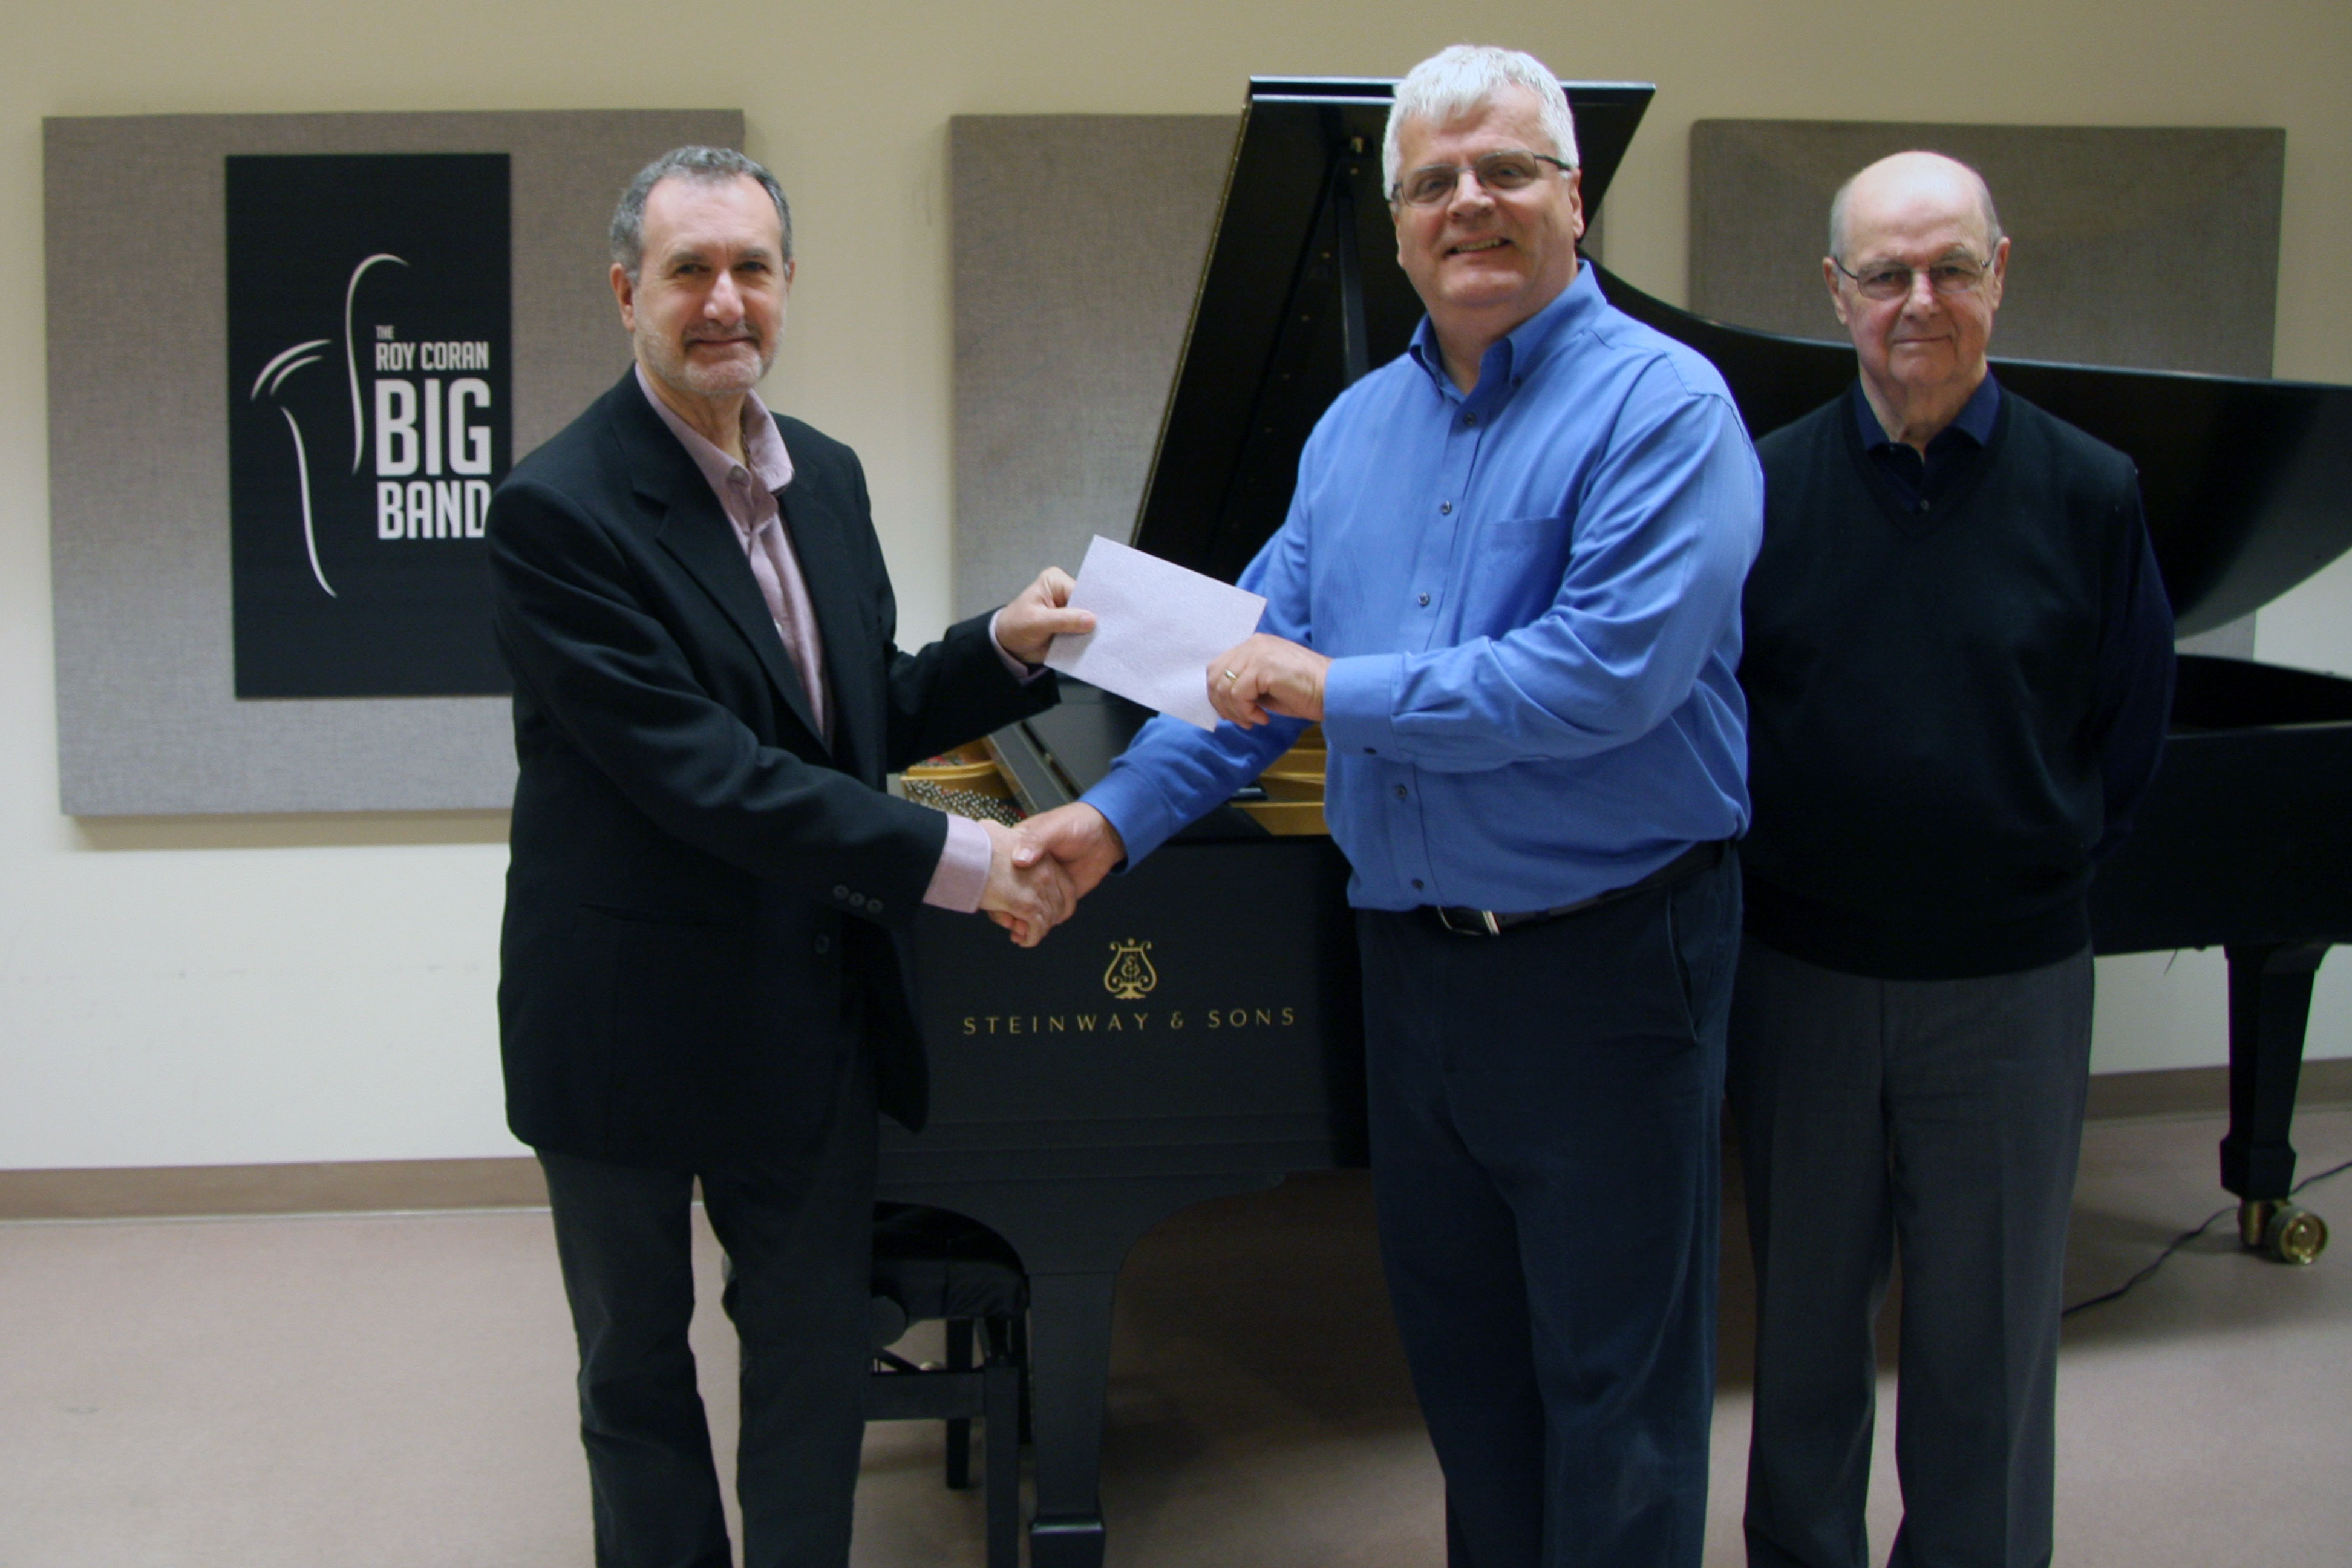 Dr. Aris Carastathis, Chair of Lakehead University's Music Department, Ted Vaillant, Director of the Roy Coran Big Band and Roy Piovesana, Band member and Fellow of Lakehead University